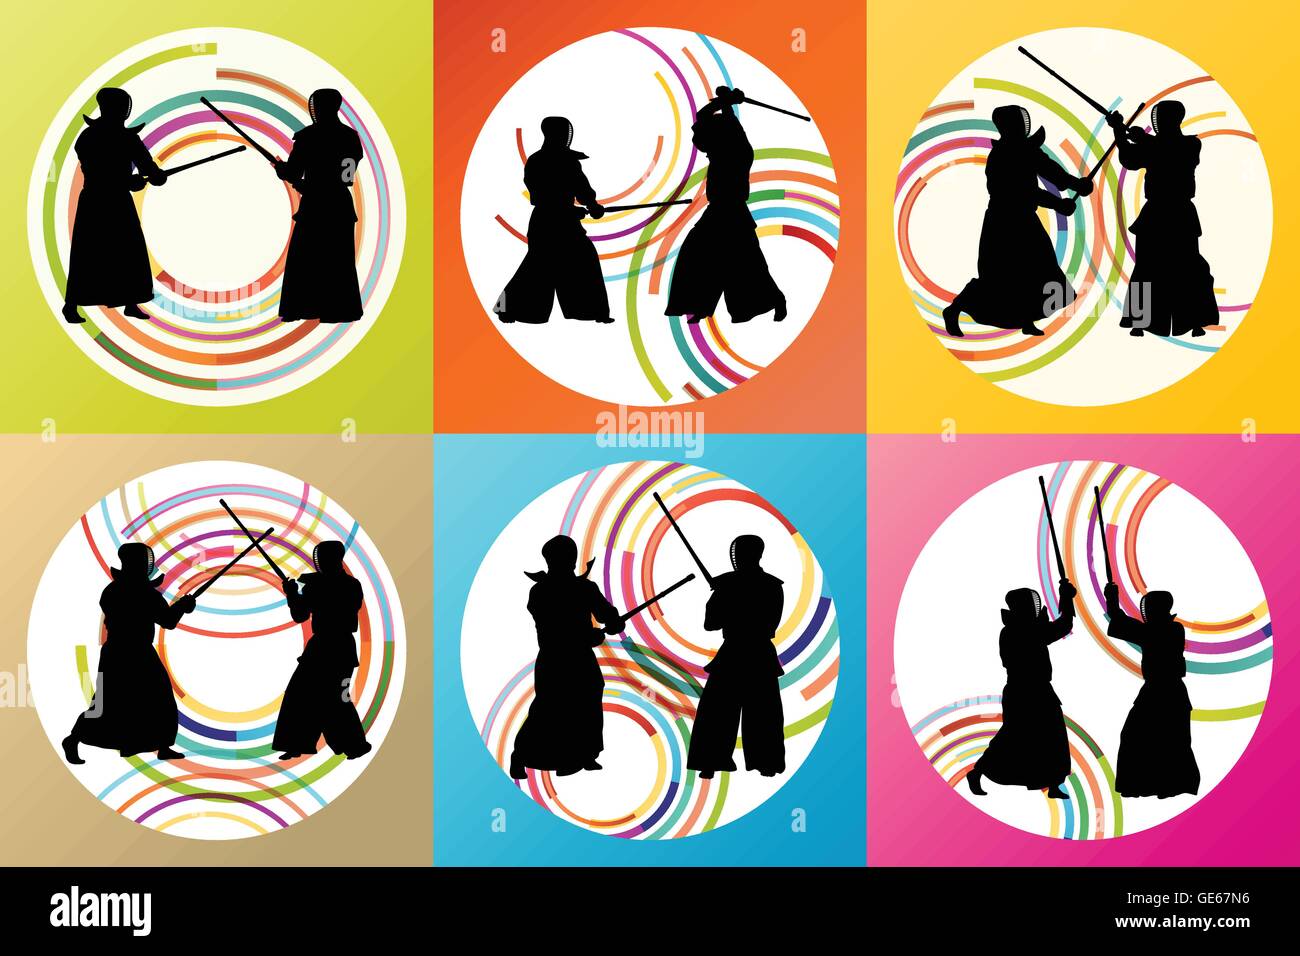 Active japanese Kendo sword martial arts fighters sport silhouettes set vector Stock Vector